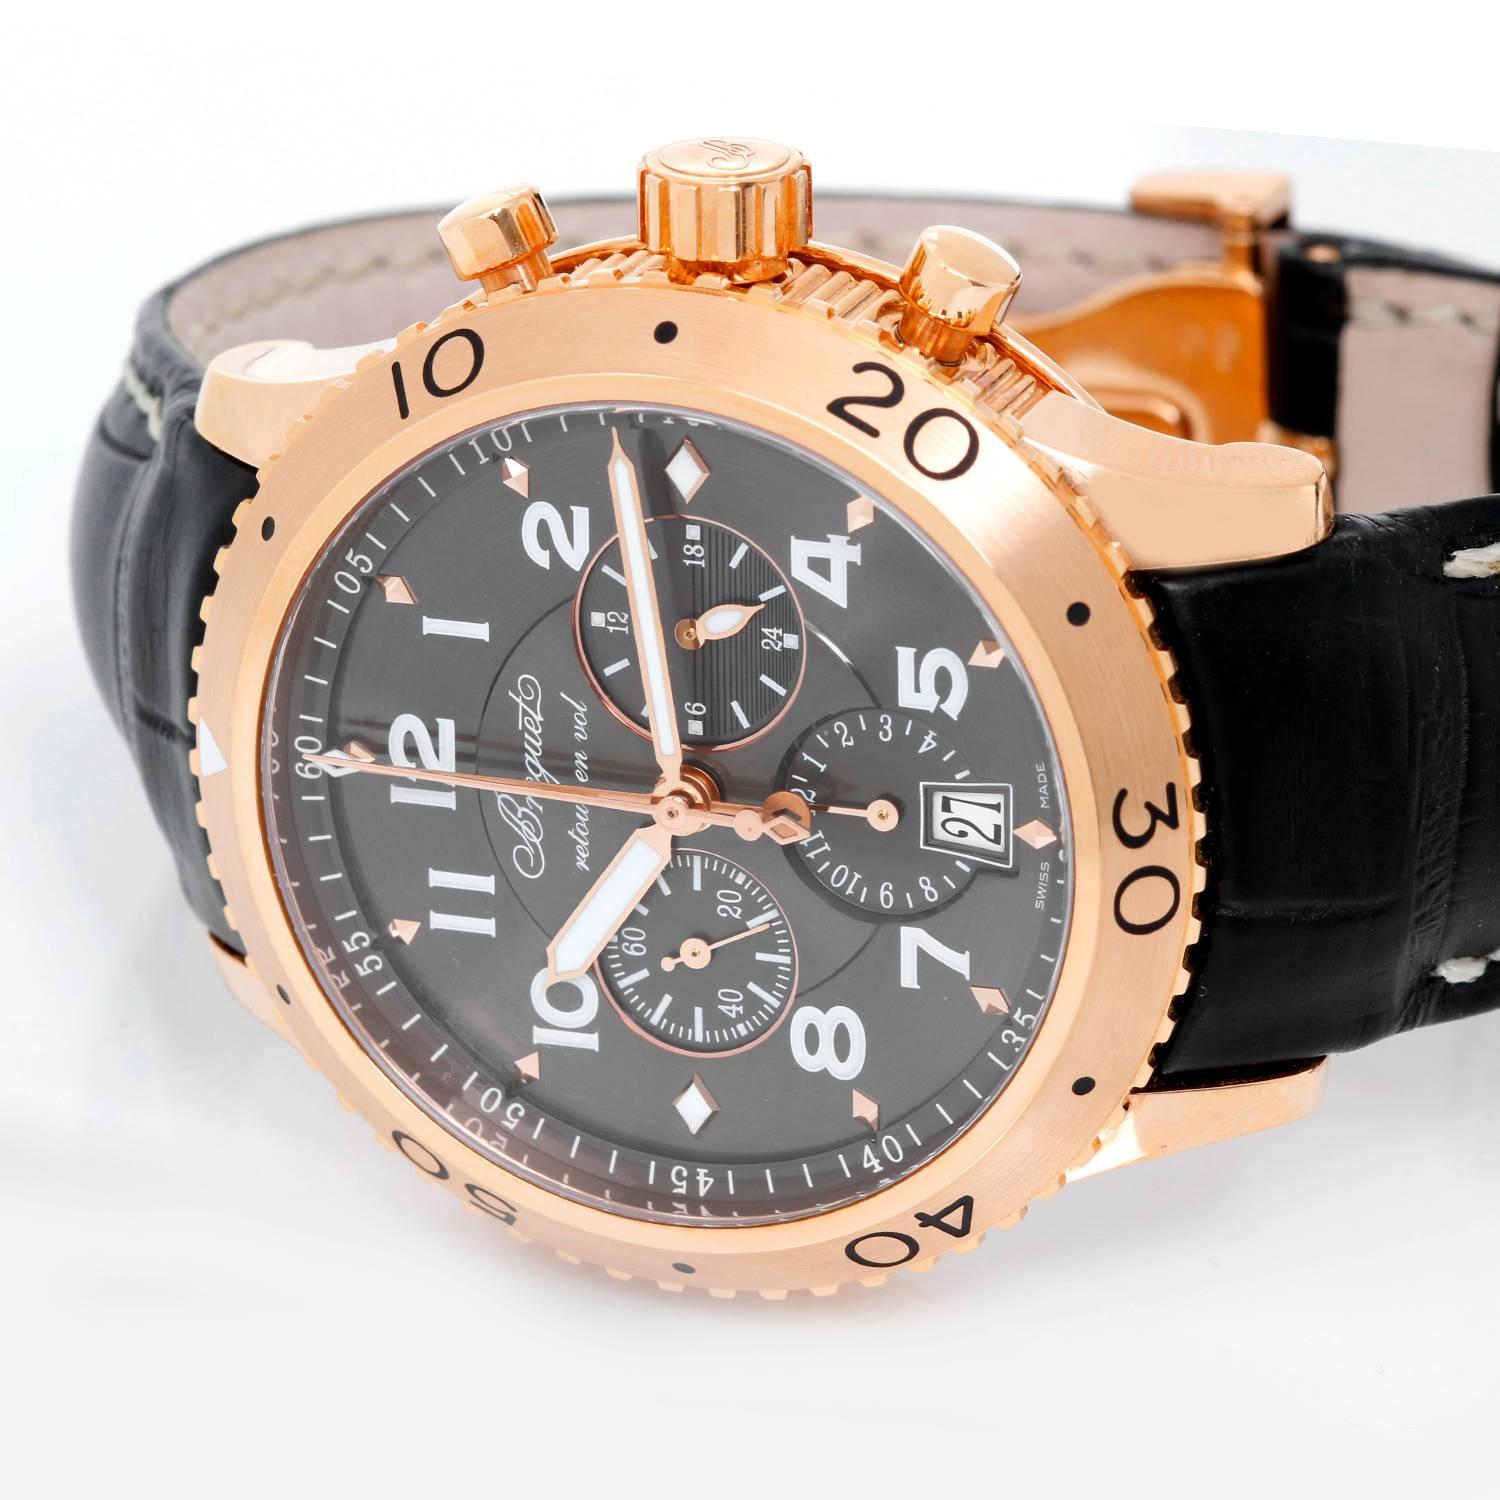 Breguet Transatlantique Type XXI Flyback Men's  Rose Gold Chronograph Watch 3810ST/92/9ZU -  Automatic winding. Rose gold case (42mm diameter). Brown dial with white Arabic numerals; flyback chronograph; hour, minute and seconds recorders; date.